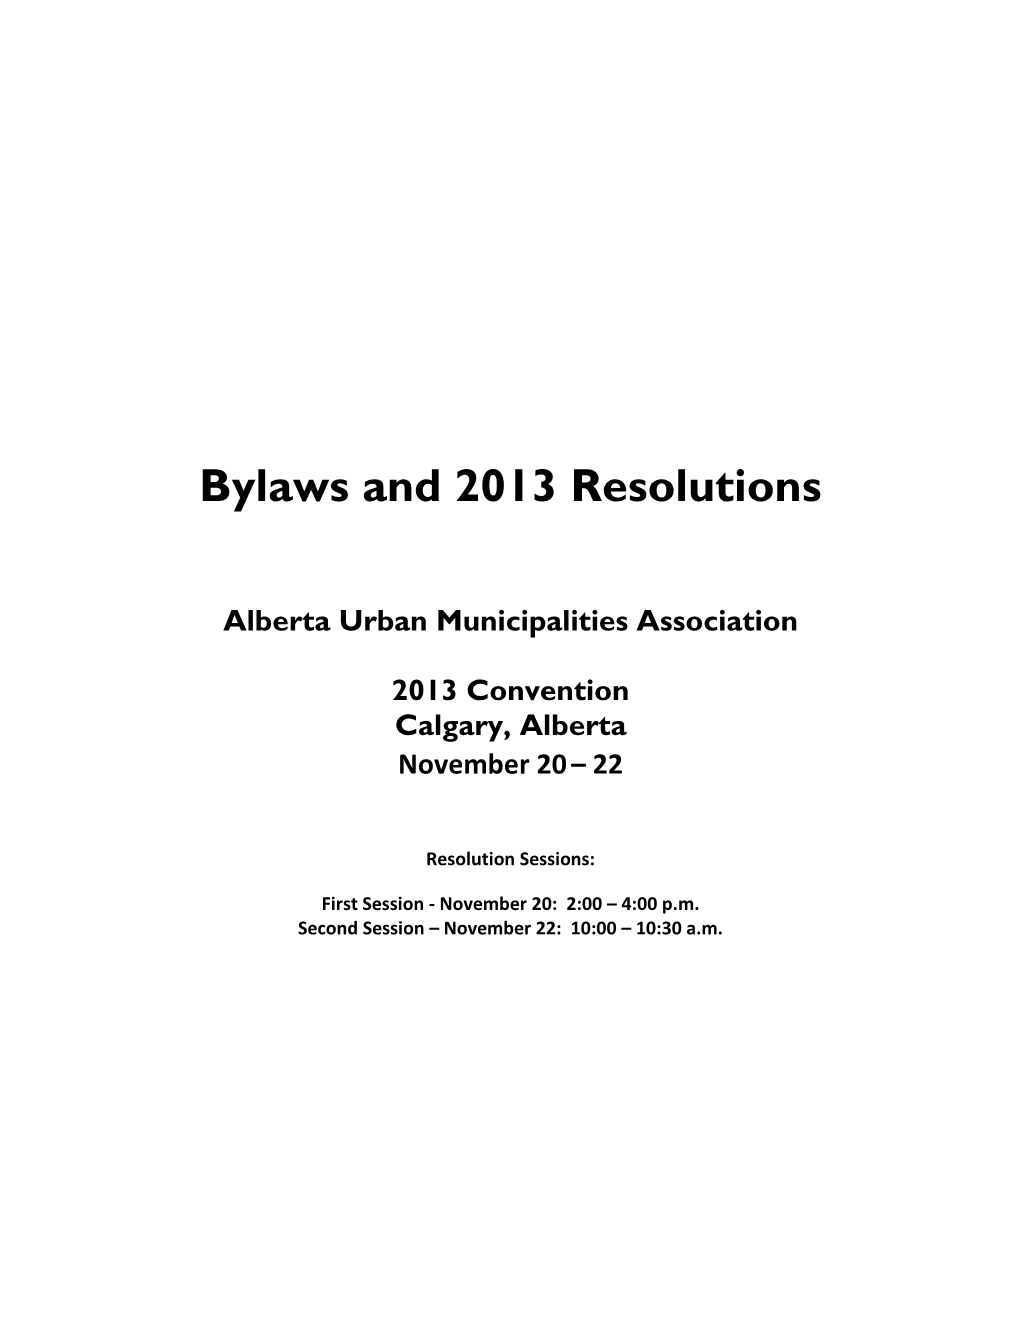 Bylaws and 2013 Resolutions Book